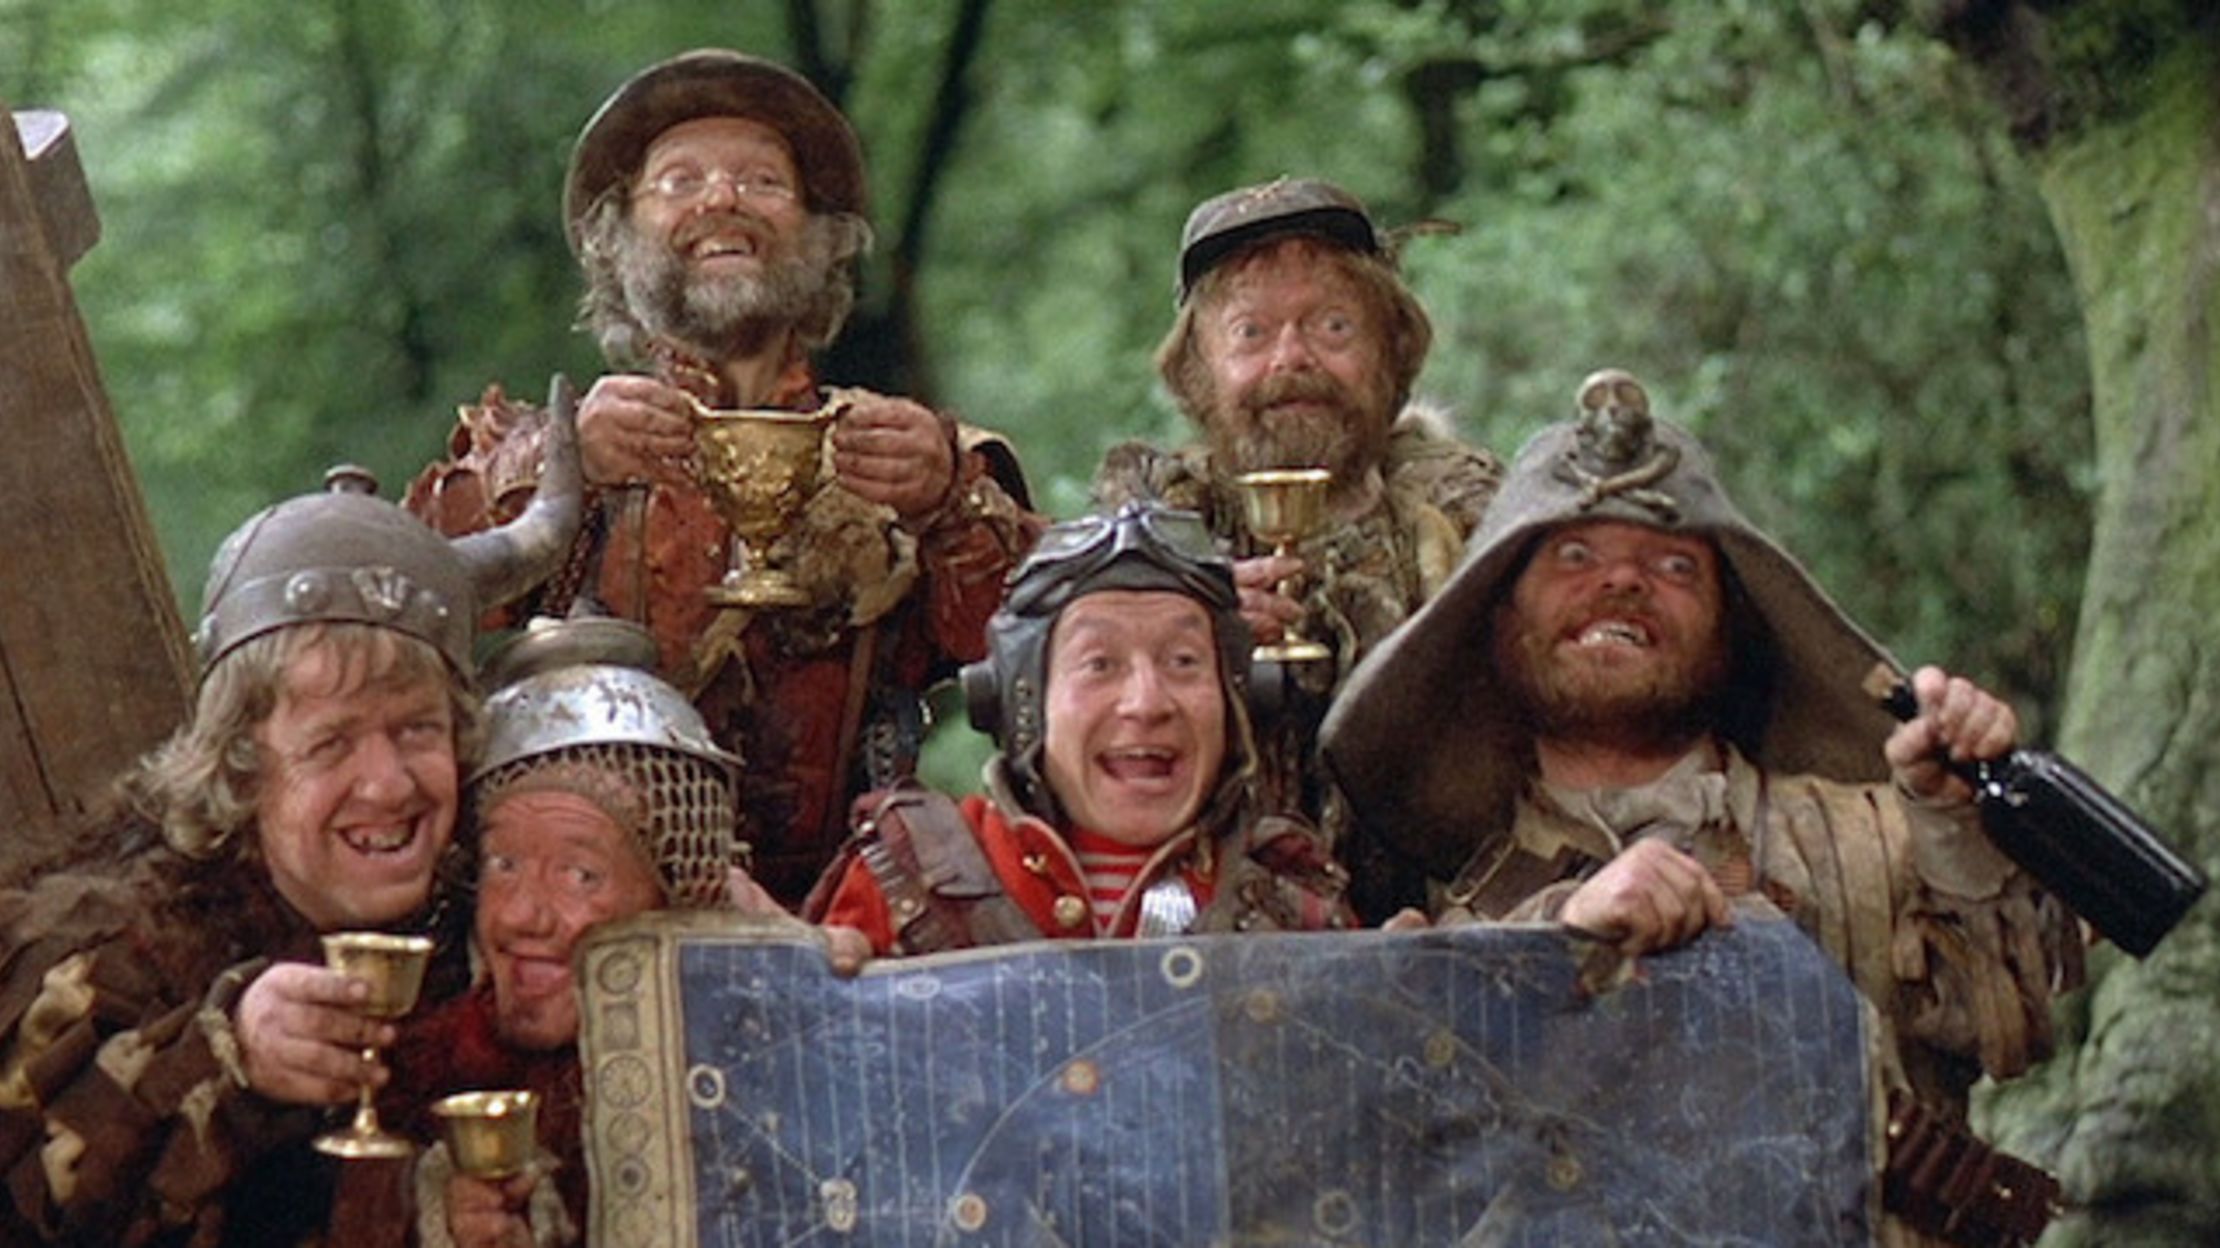 15 Fun Facts About 'Time Bandits'